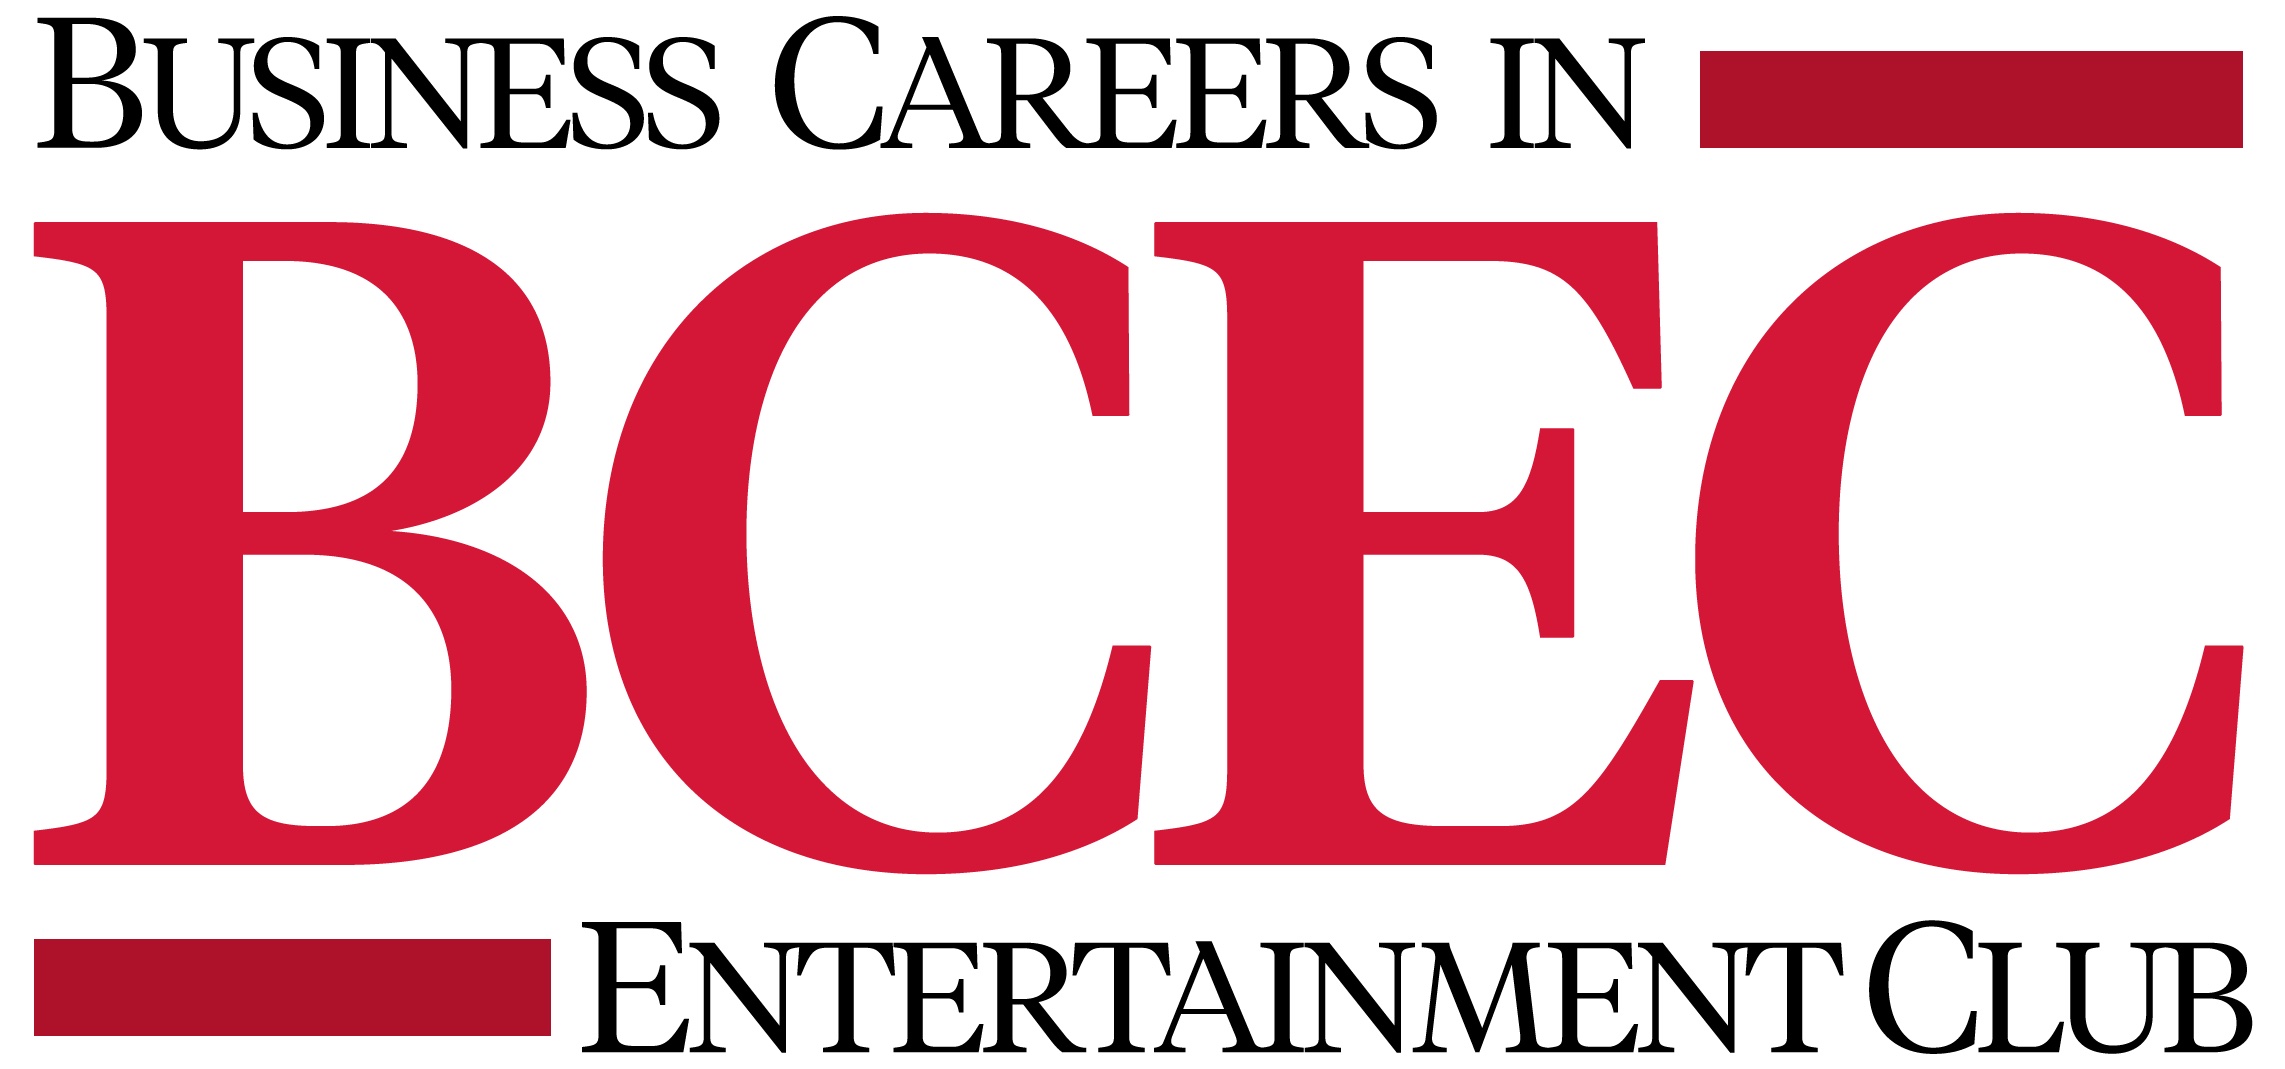 Business Careers in Entertainment Club Logo